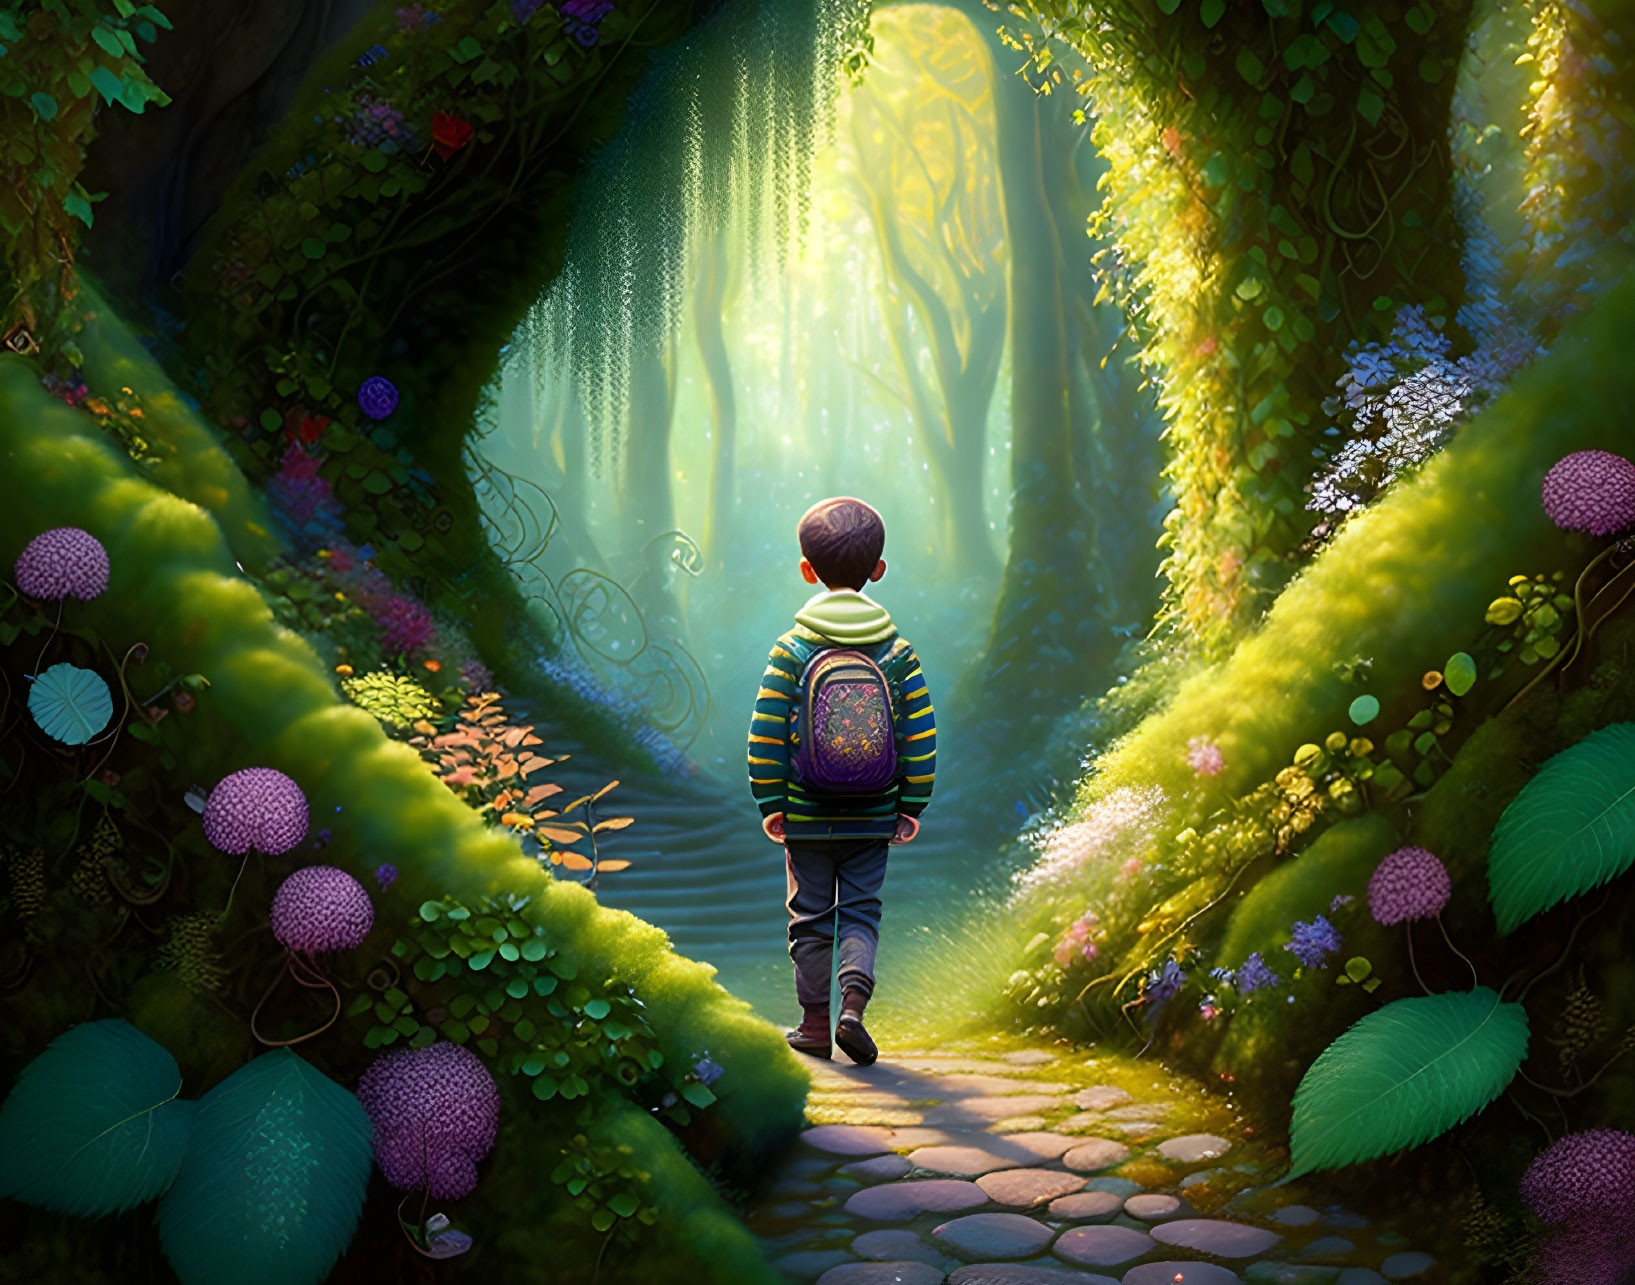 Child with backpack at magical forest entrance surrounded by vibrant flora and mystic light.